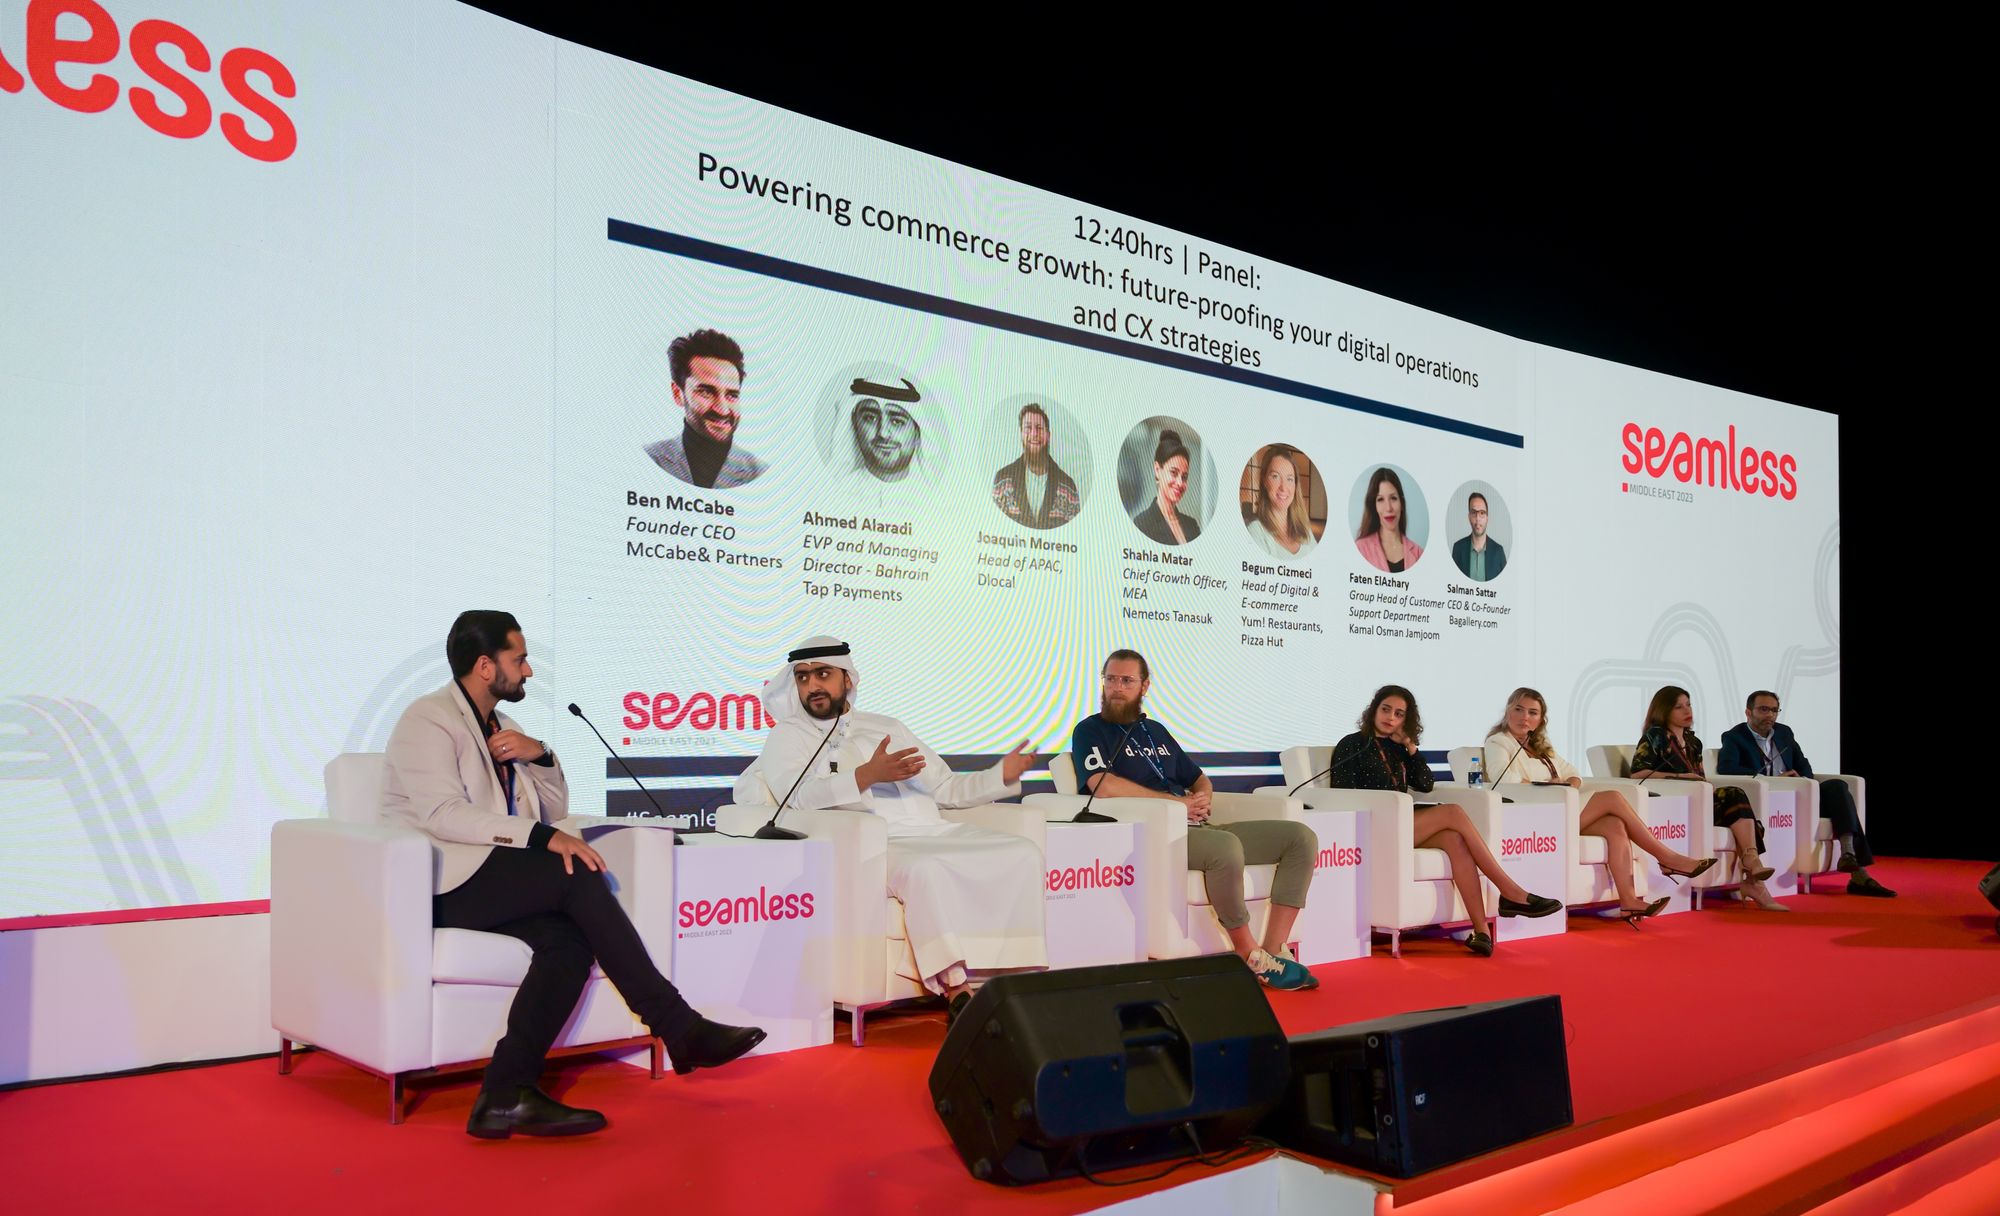 Ahmed AlAradi spoke at a panel "Powering commerce growth: future-proofing your digital operations and CX strategies" at Seamless Dubai 2023